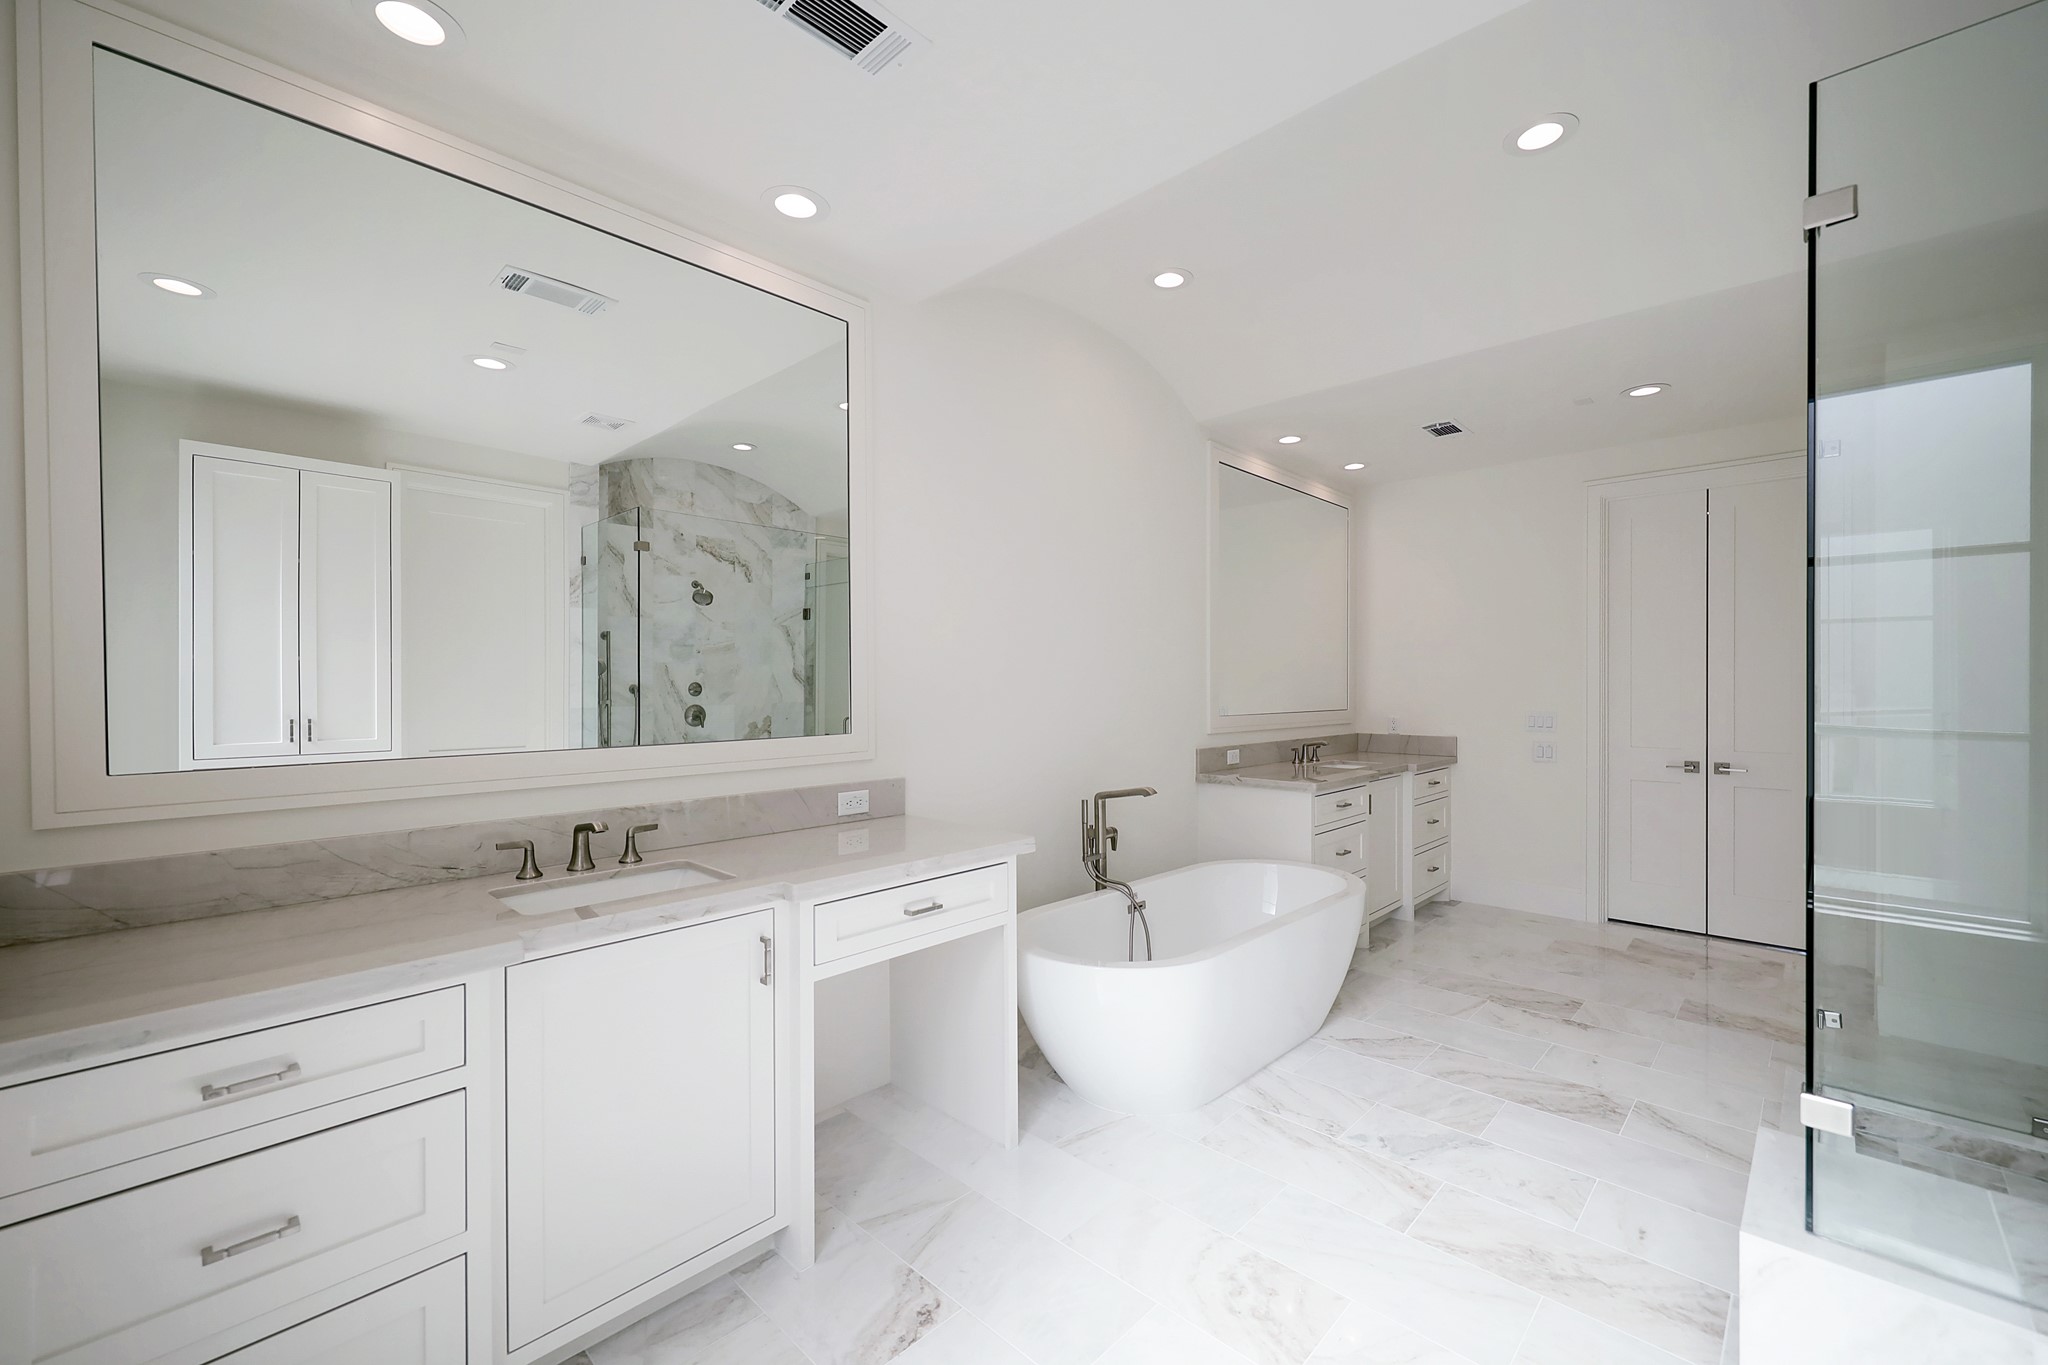 Beautiful primary bathroom with natural marble floors and counter tops